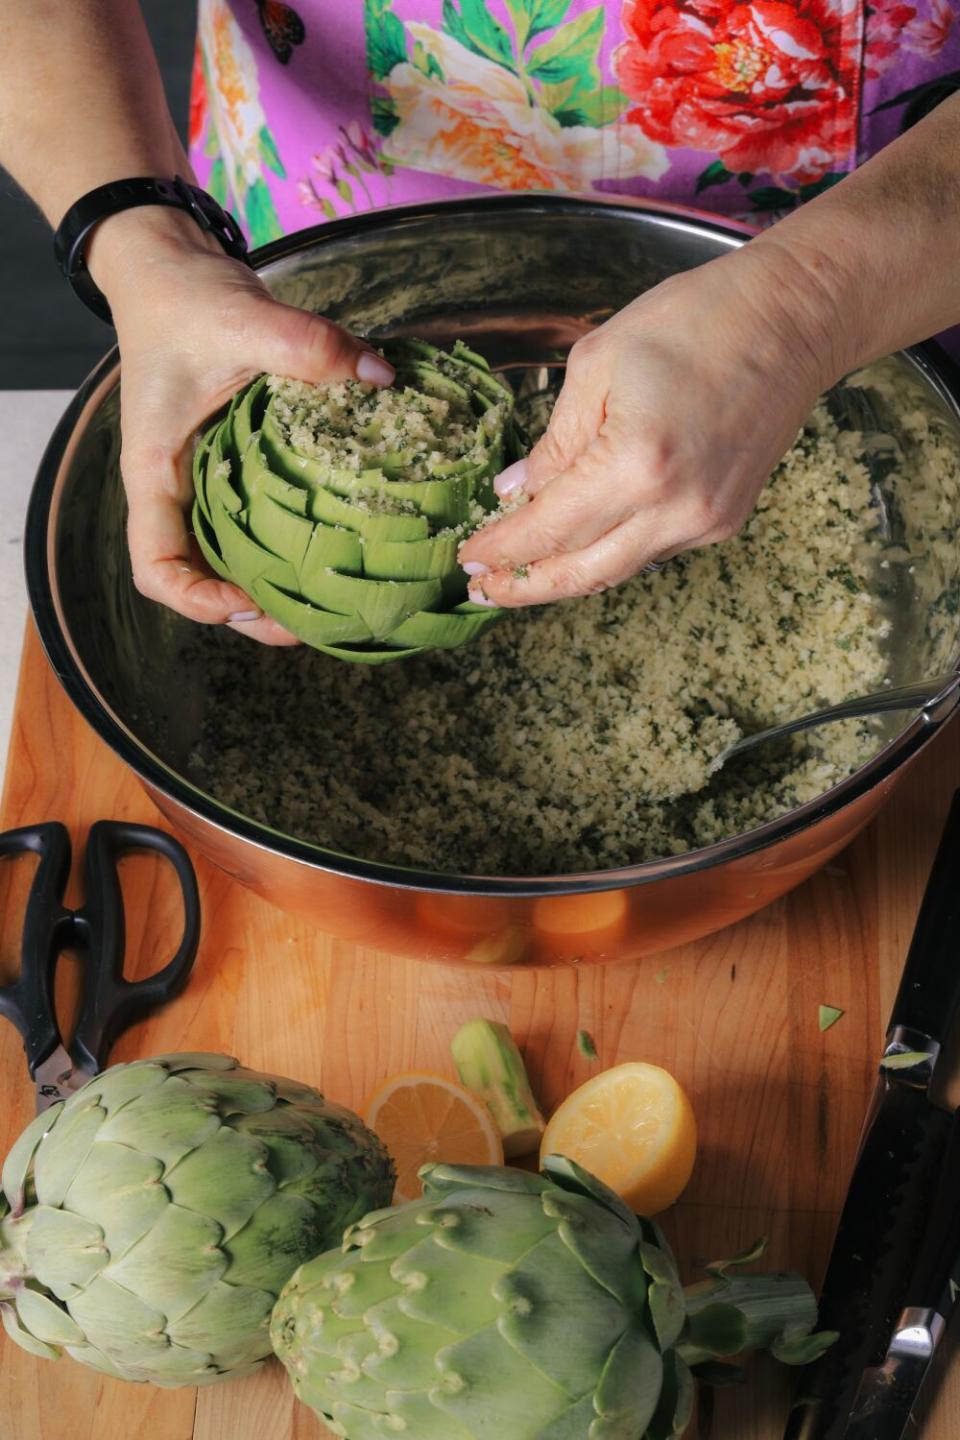 Hands holding an artichoke over a pan of stuffing